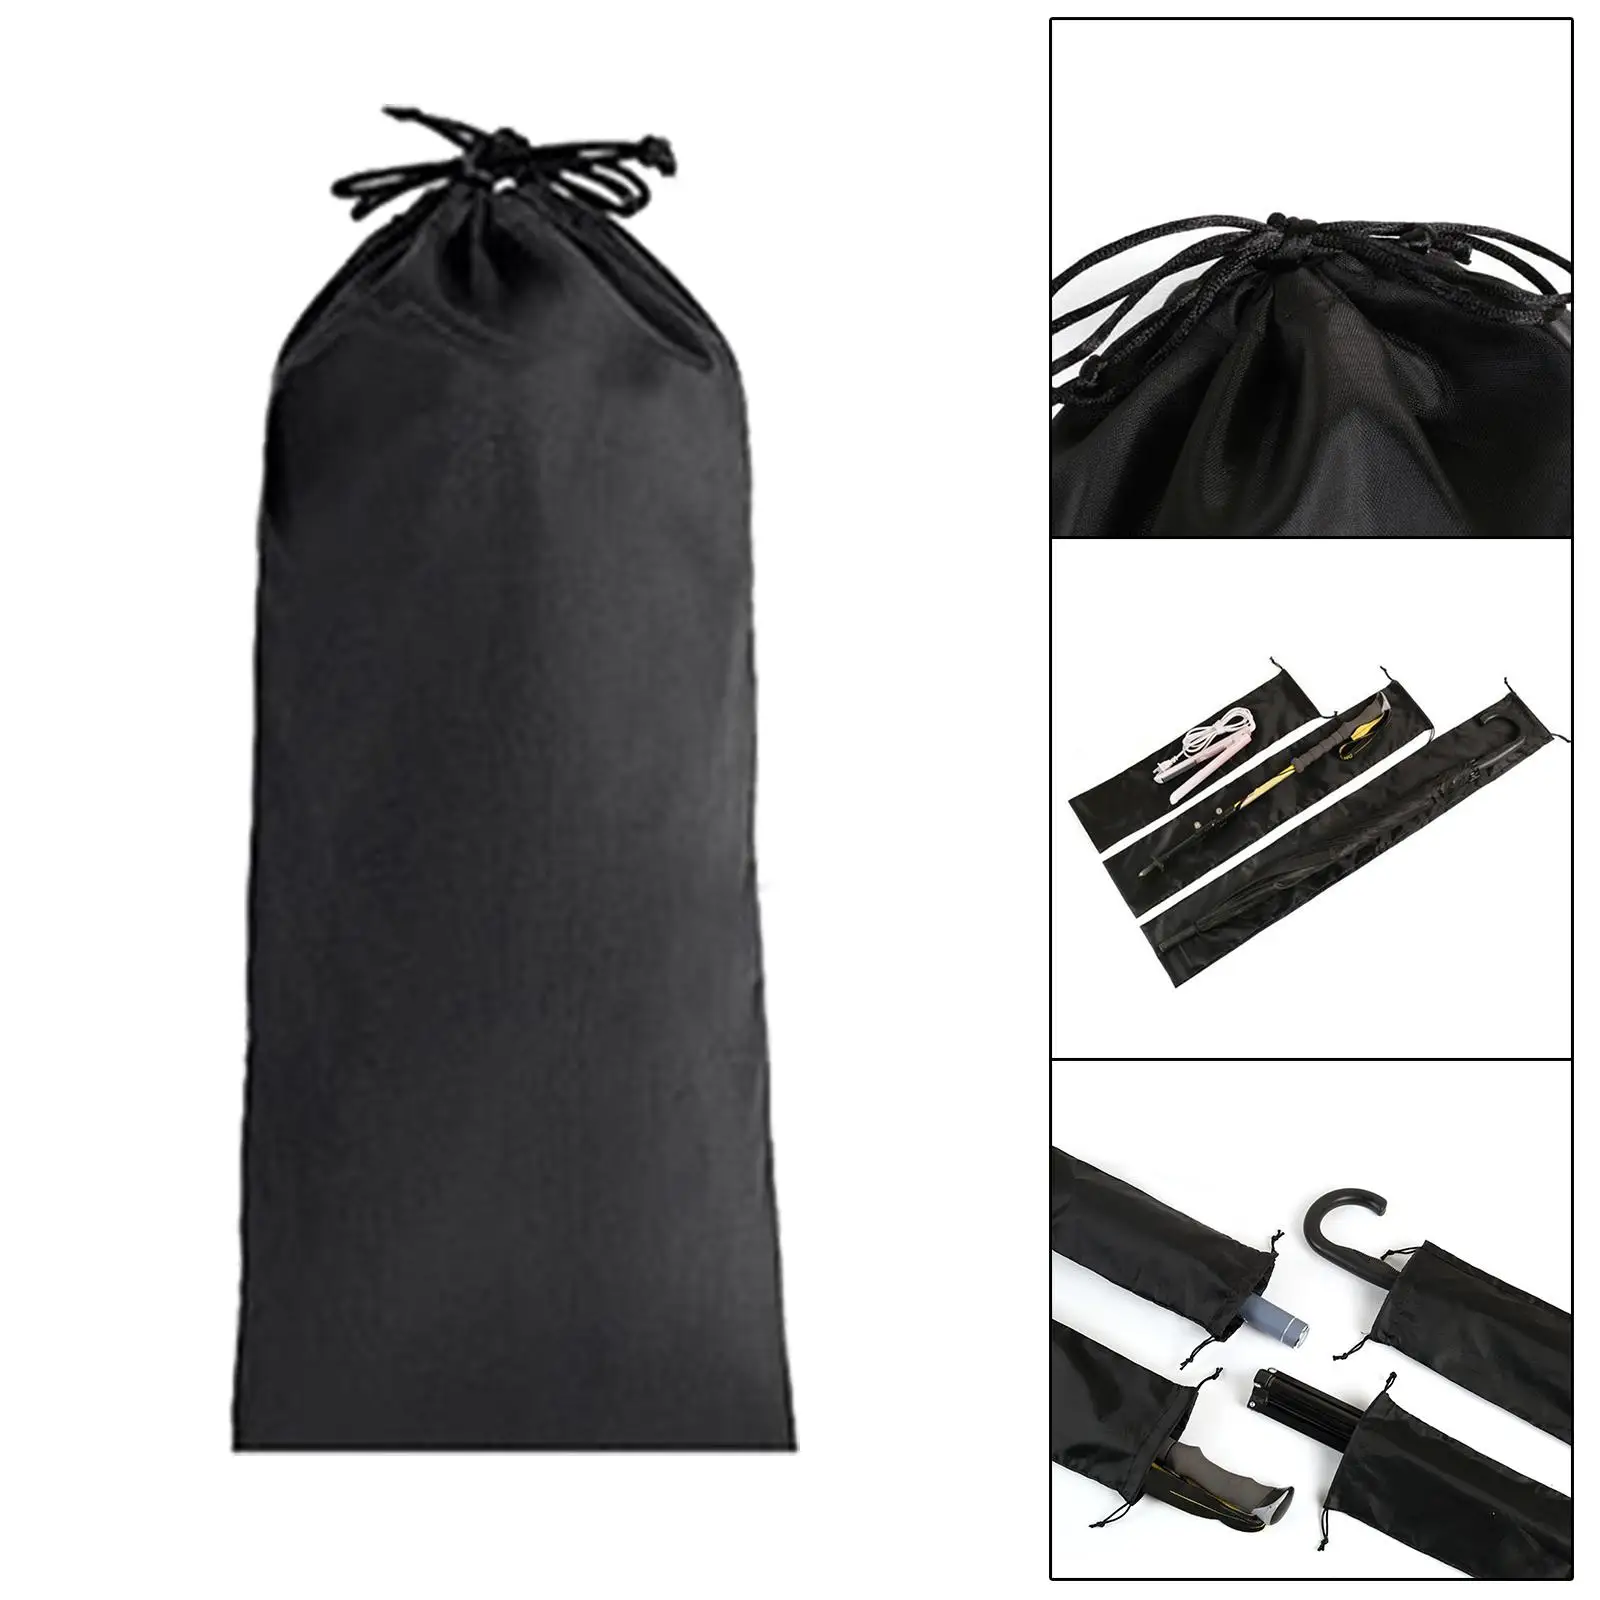 Portable Storage Bag Pouch Nylon Drawstring Bags Home Tent Poles Backpacking Umbrellas Container for Tripods Other Equipment